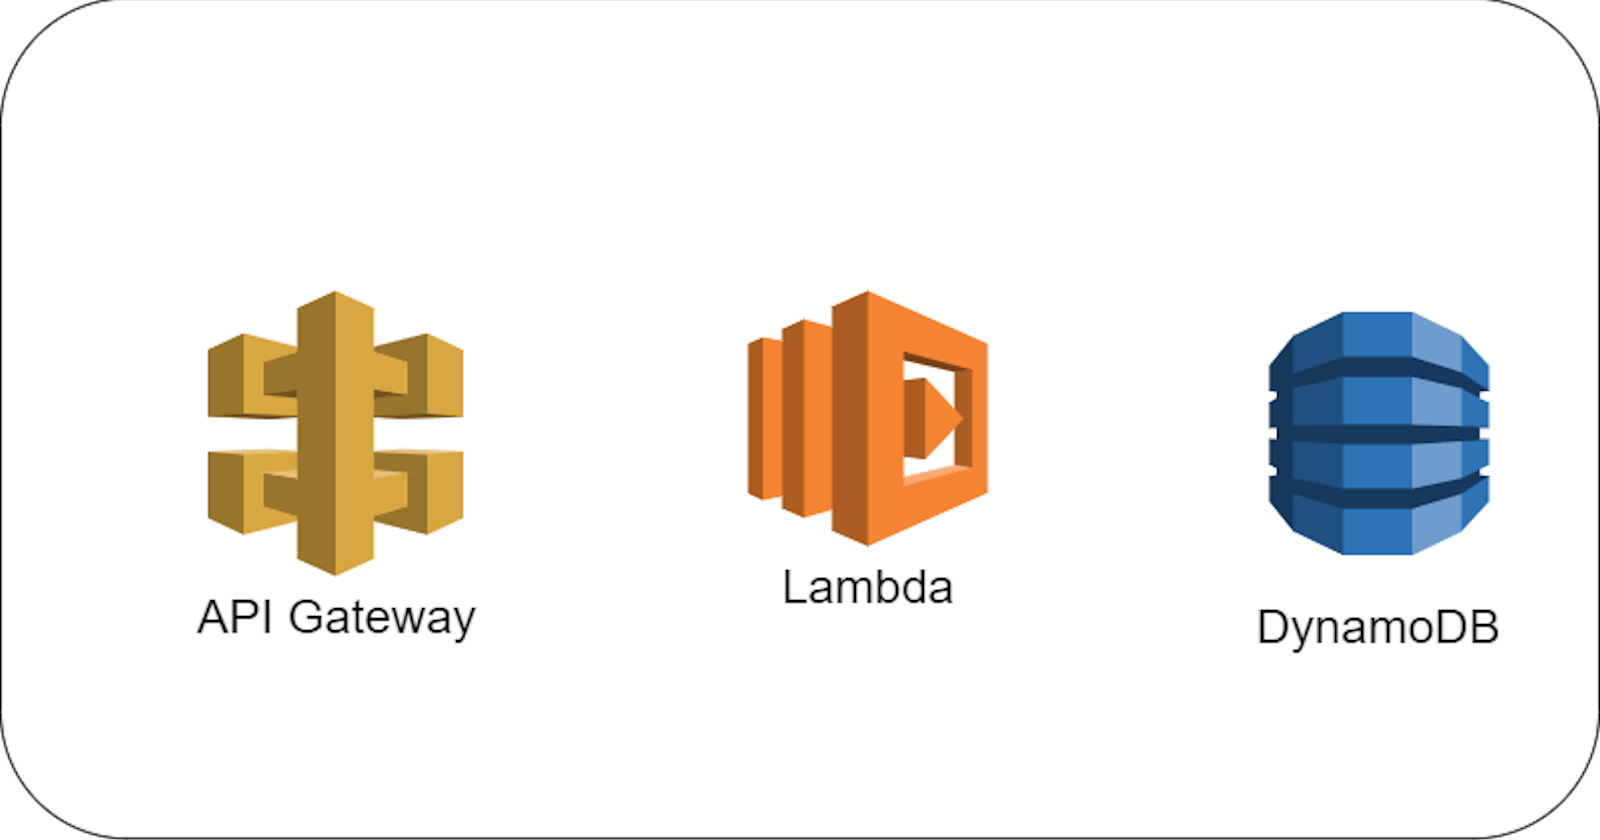 Build your first Serverless application 🚀